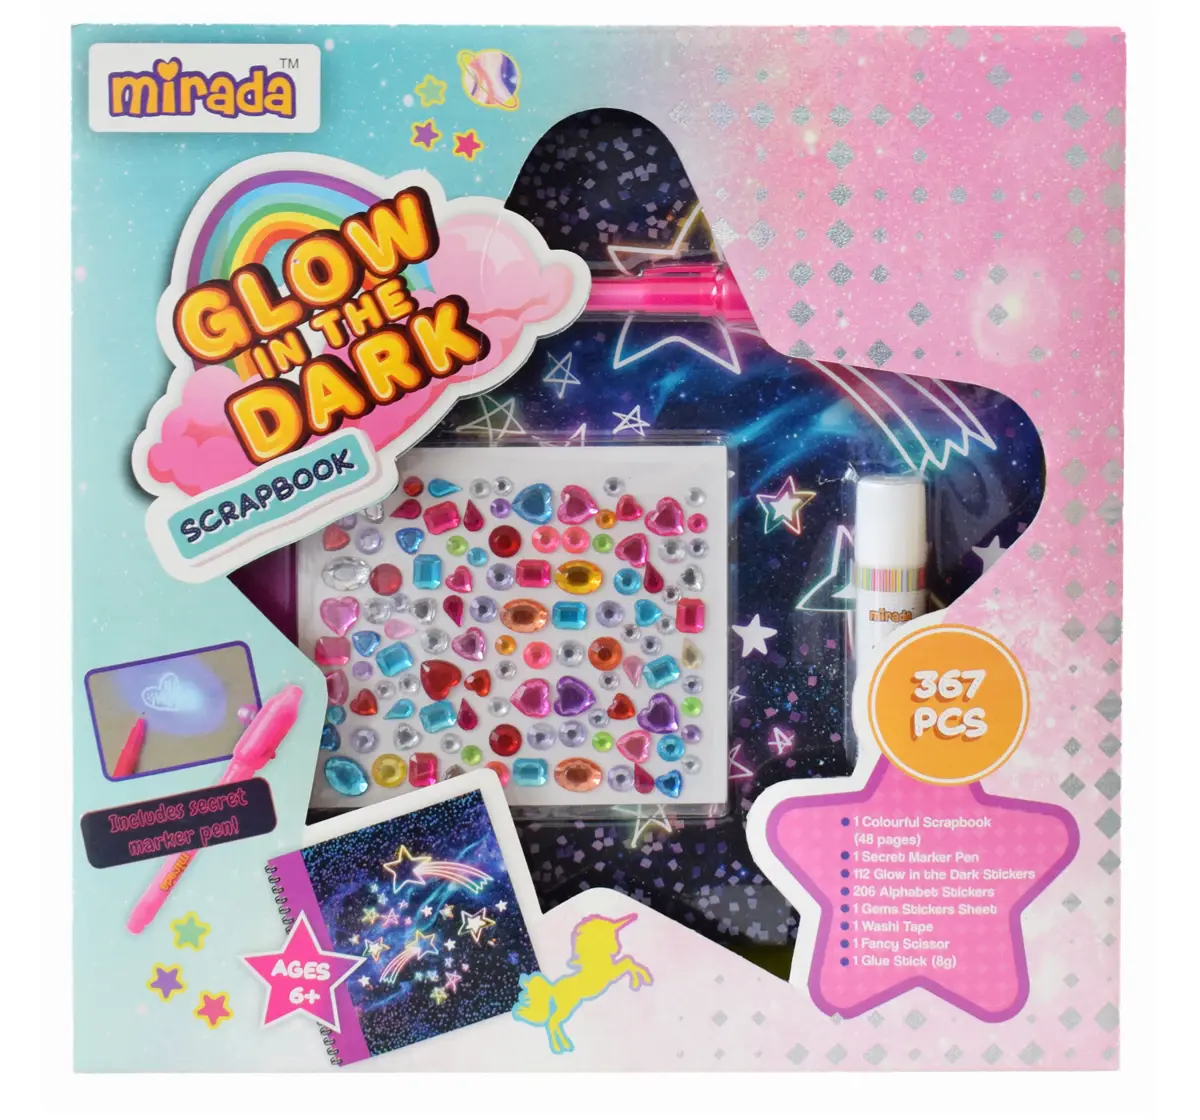 Glow In The Dark BFF Diary by Mirada, Includes 367 Pcs, Secret Marker Pen & Glow In The Dark Stickers, Multicolour, 3 Years+